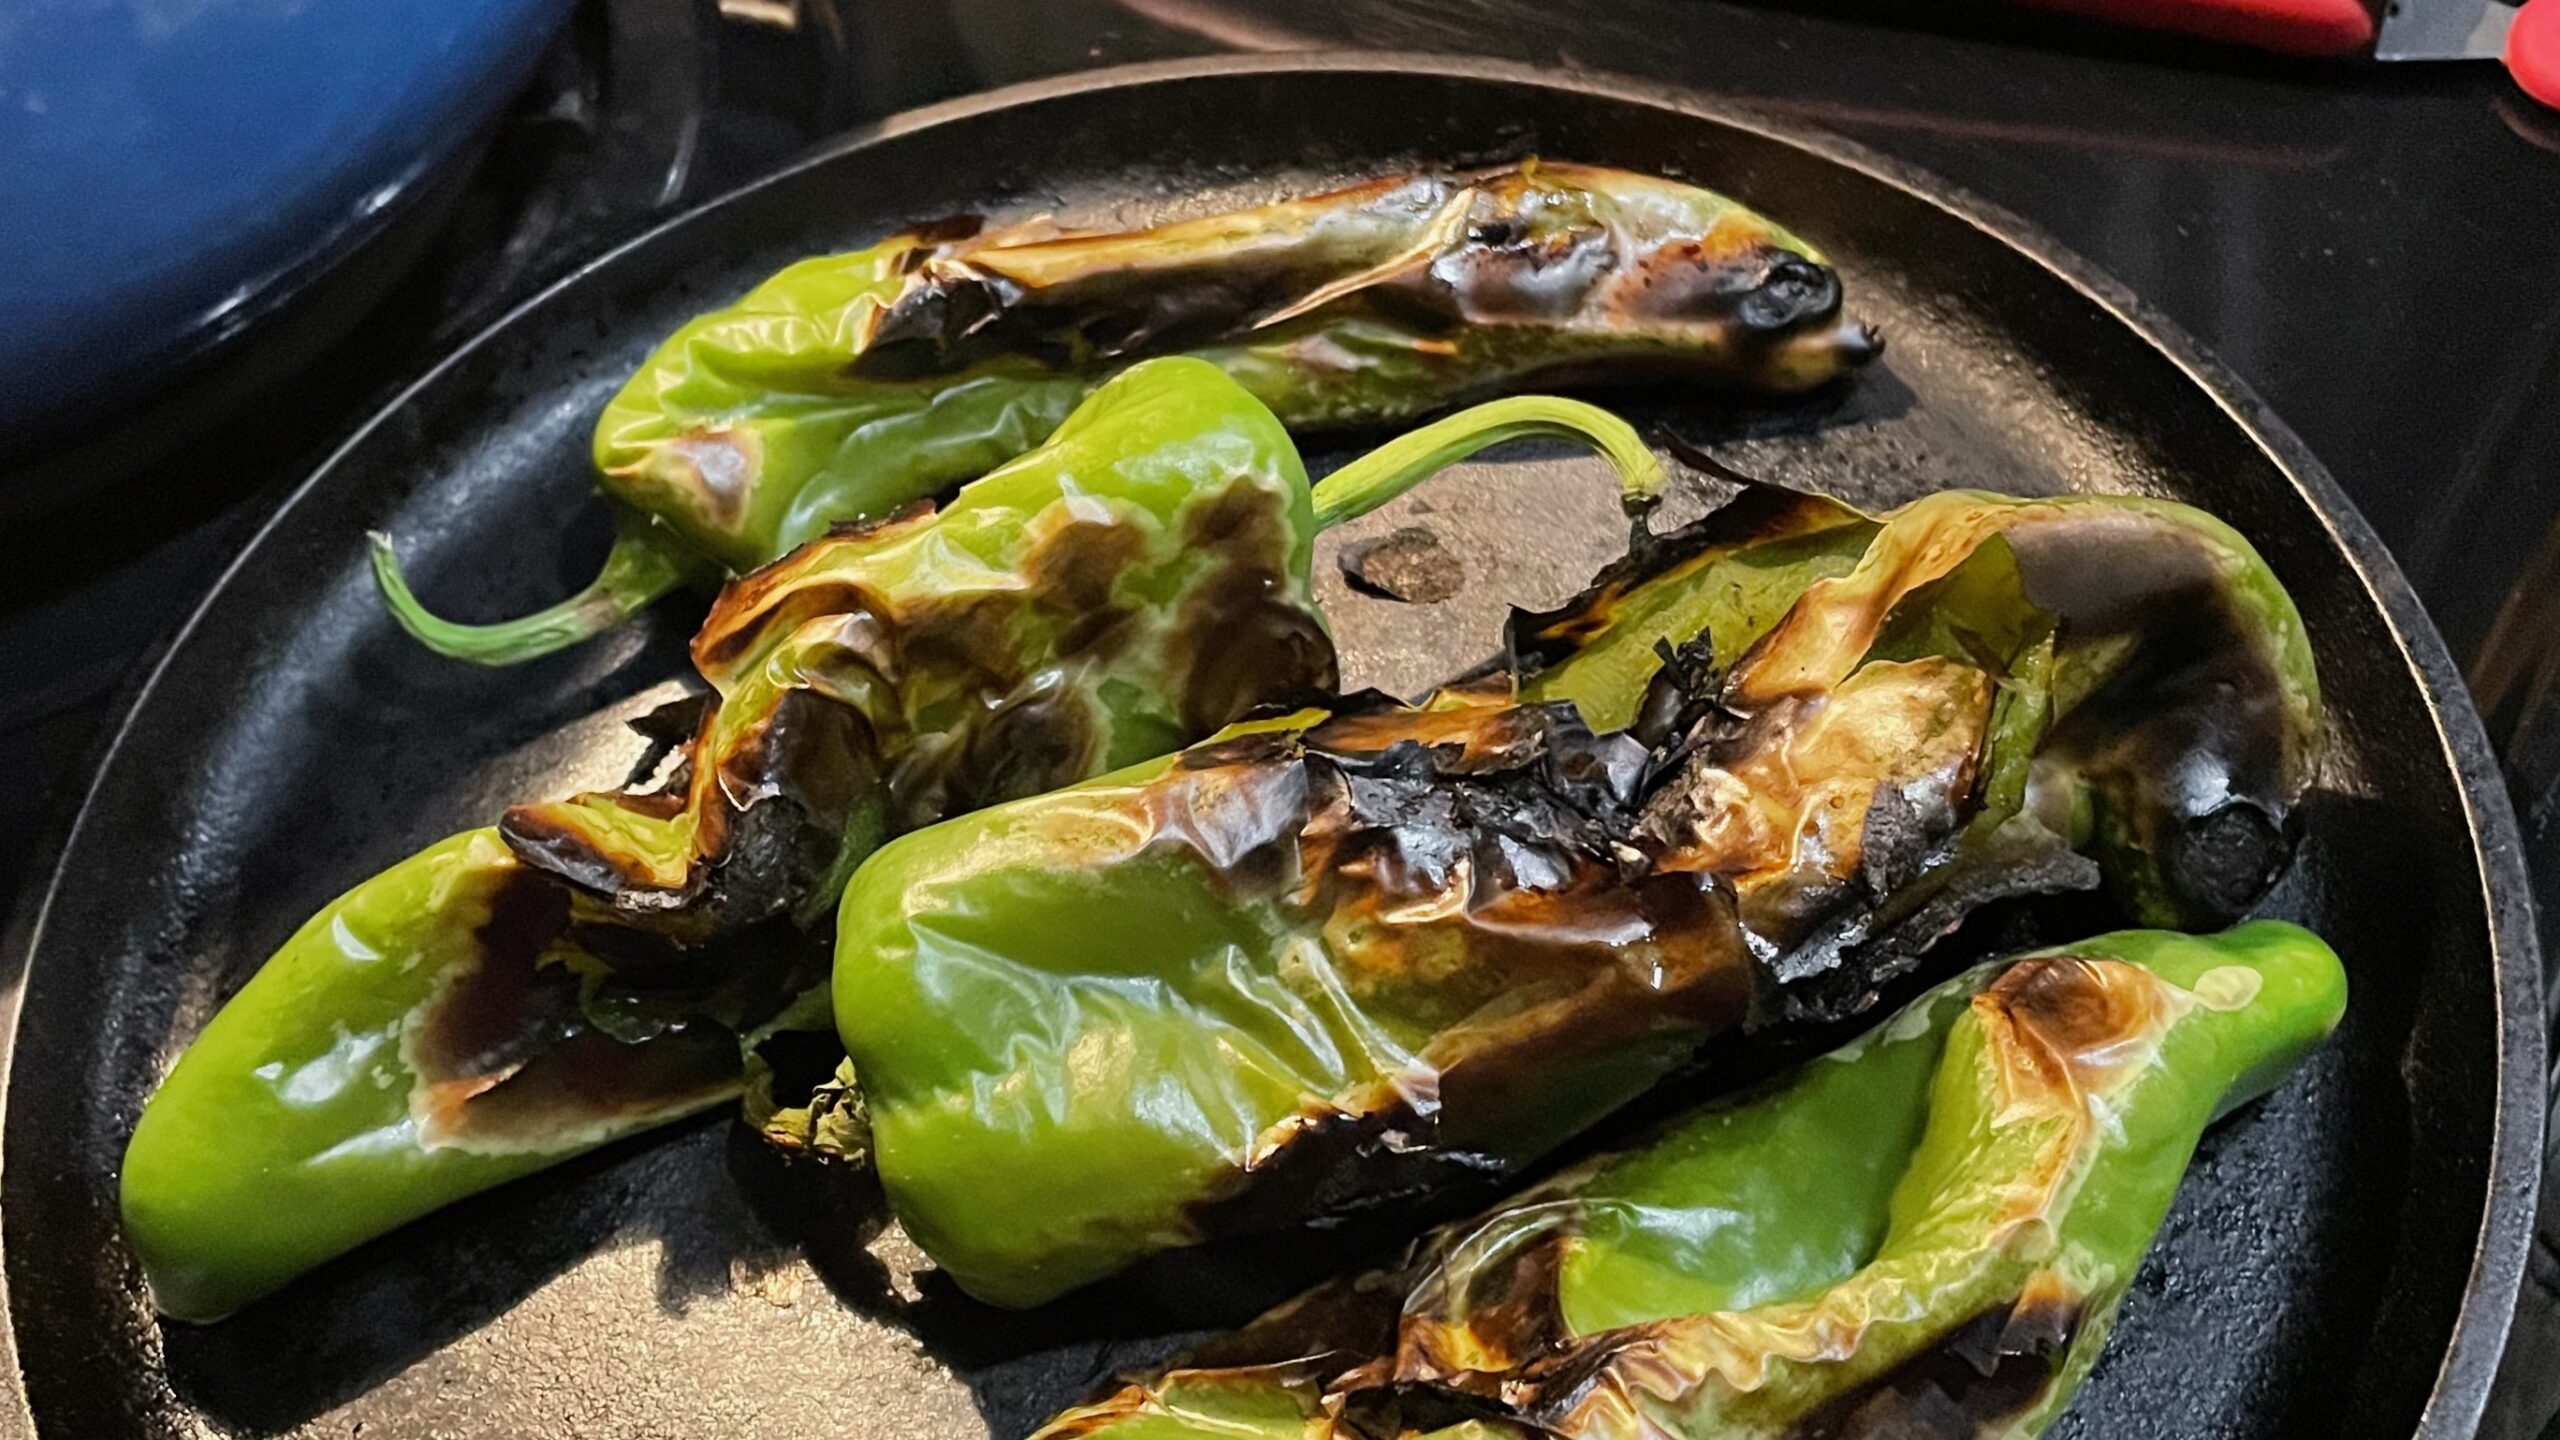 Why Wait for August to Roast Green Chile?